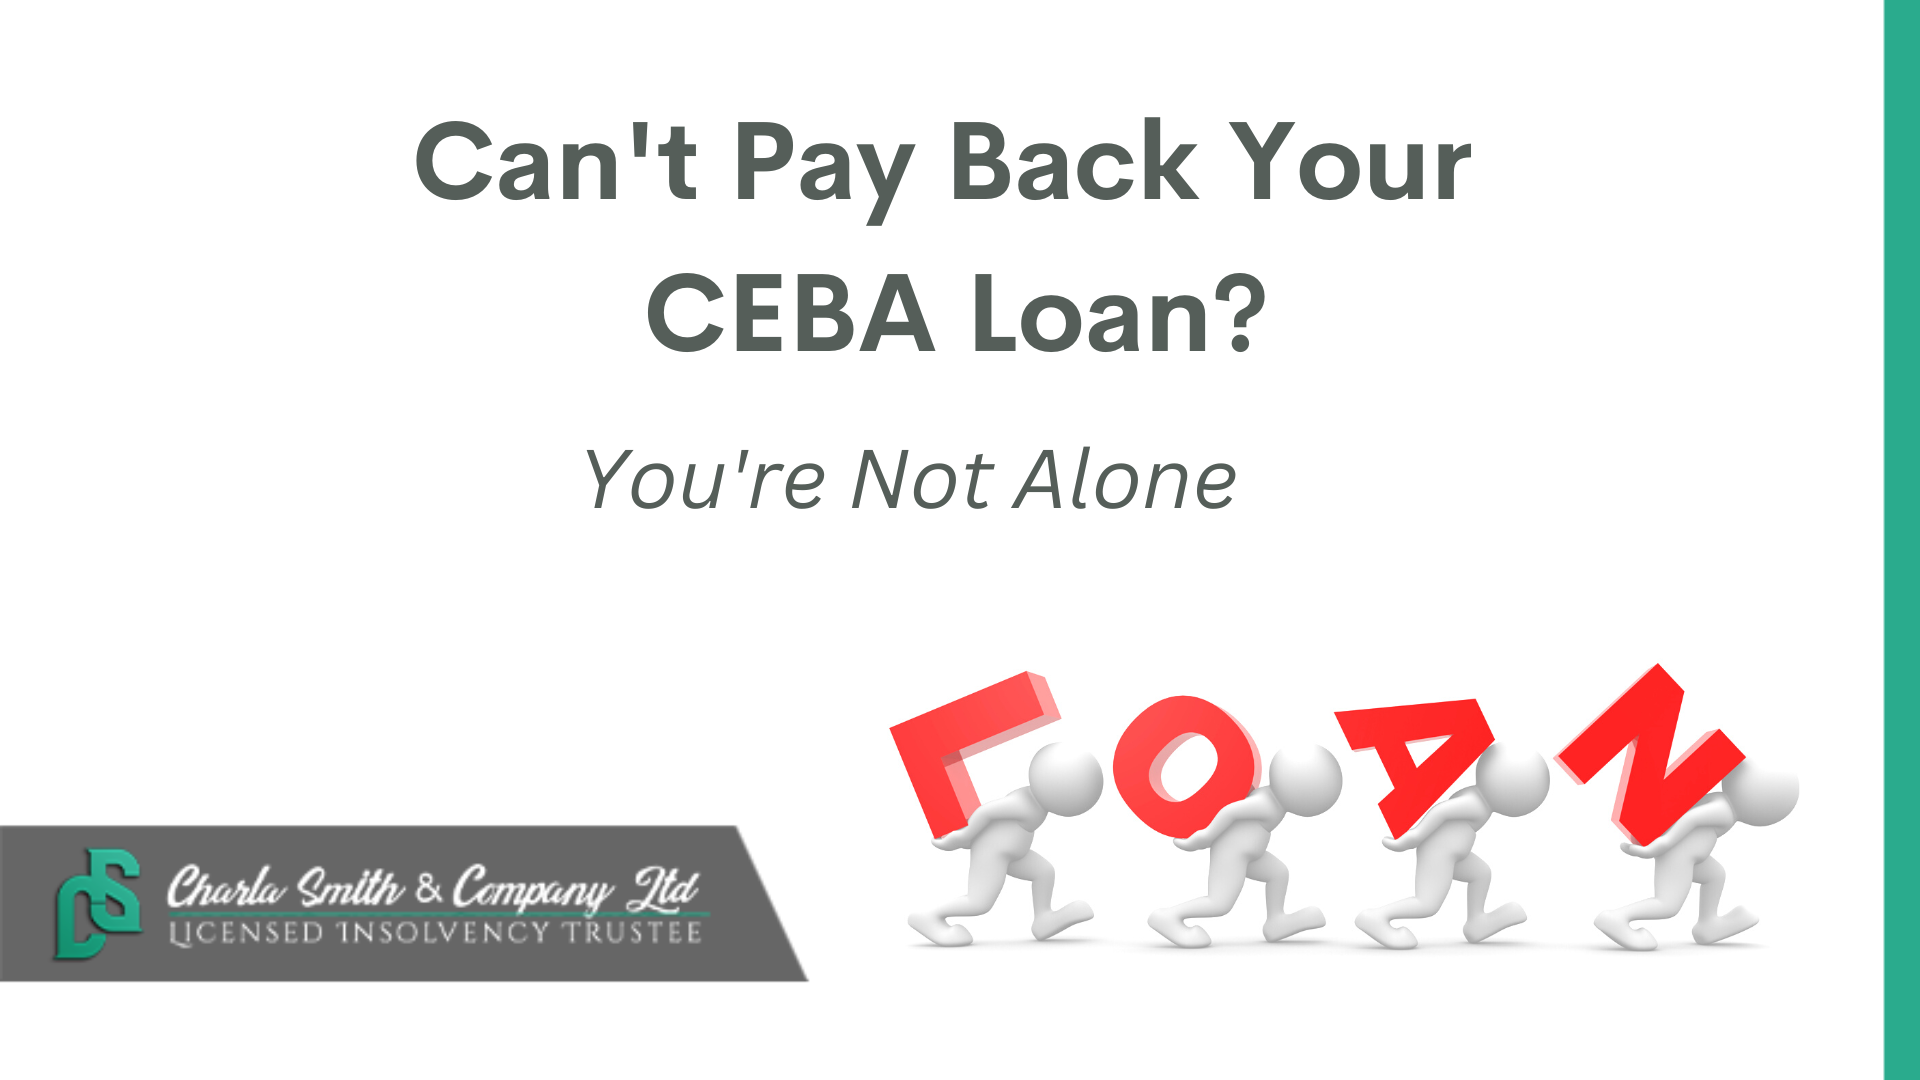 Can't Pay Back Your CEBA Loan? You're Not Alone